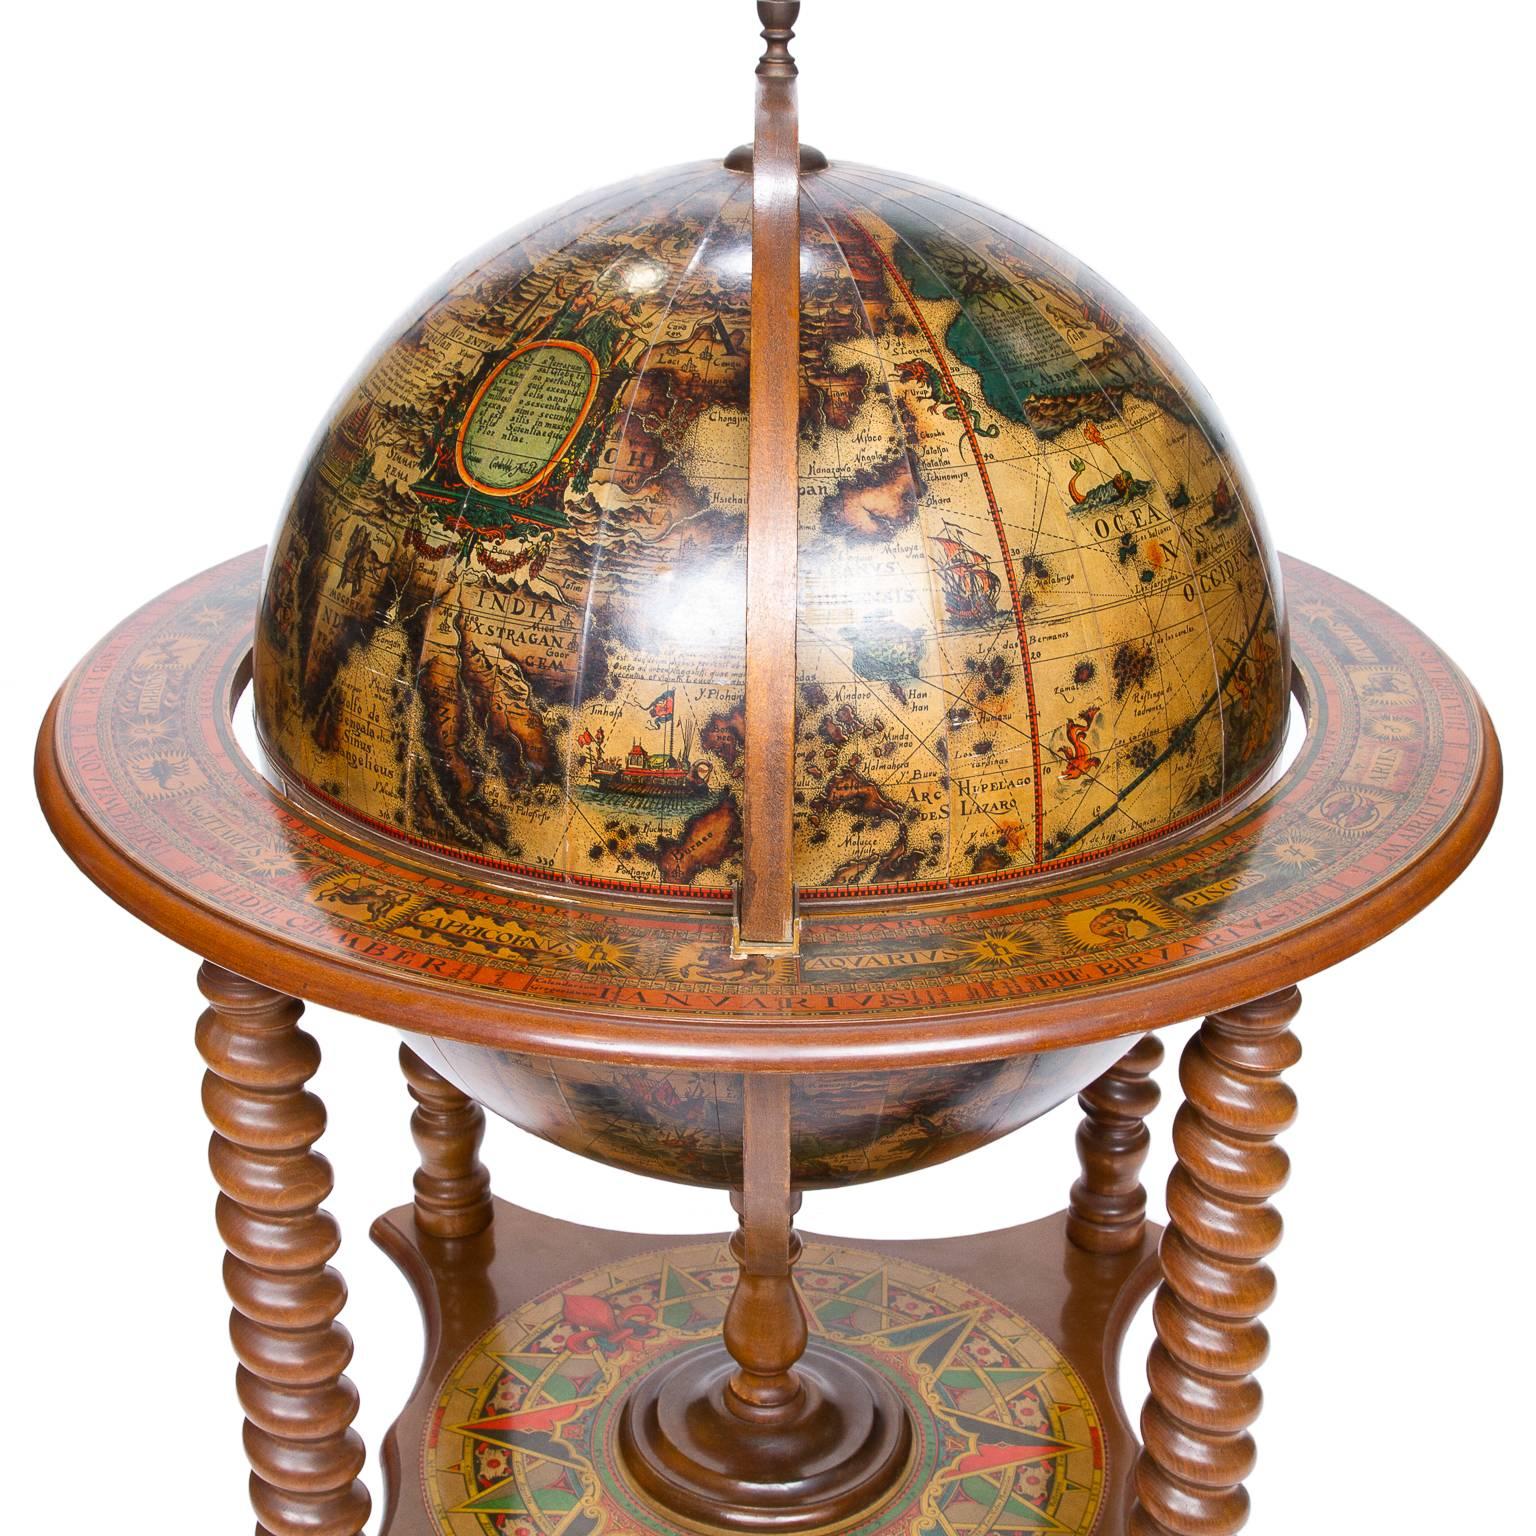 A nice vintage decorated globe on stand and opening to reveal a fitted bar storage complete with ice container. The printed color map is in 12 sections and multiple colors. The rim and lower platform also with paper layouts of 